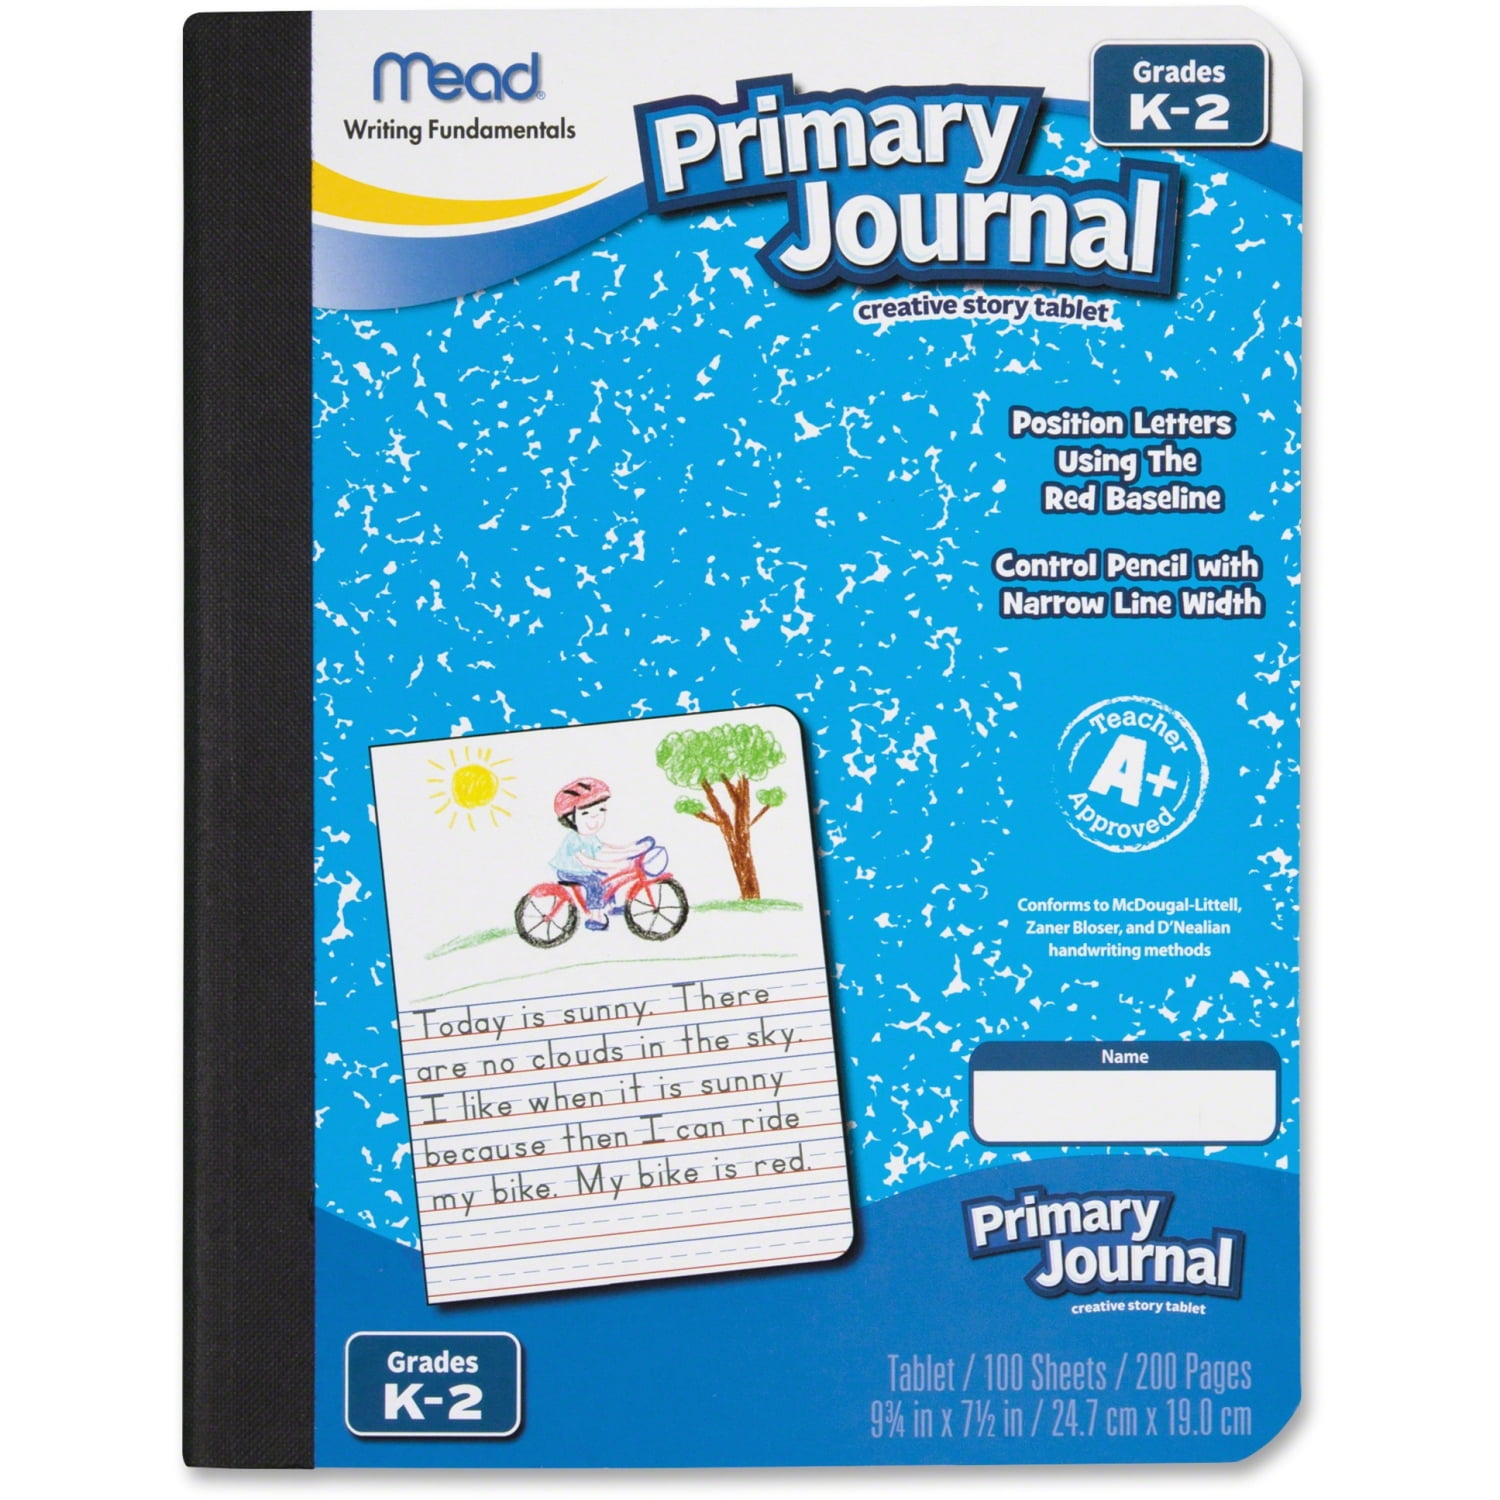 100-Sheet Basics Primary Journal 1/2 Ruled & Blank Space 9.75 x 7.5 15-Pack 